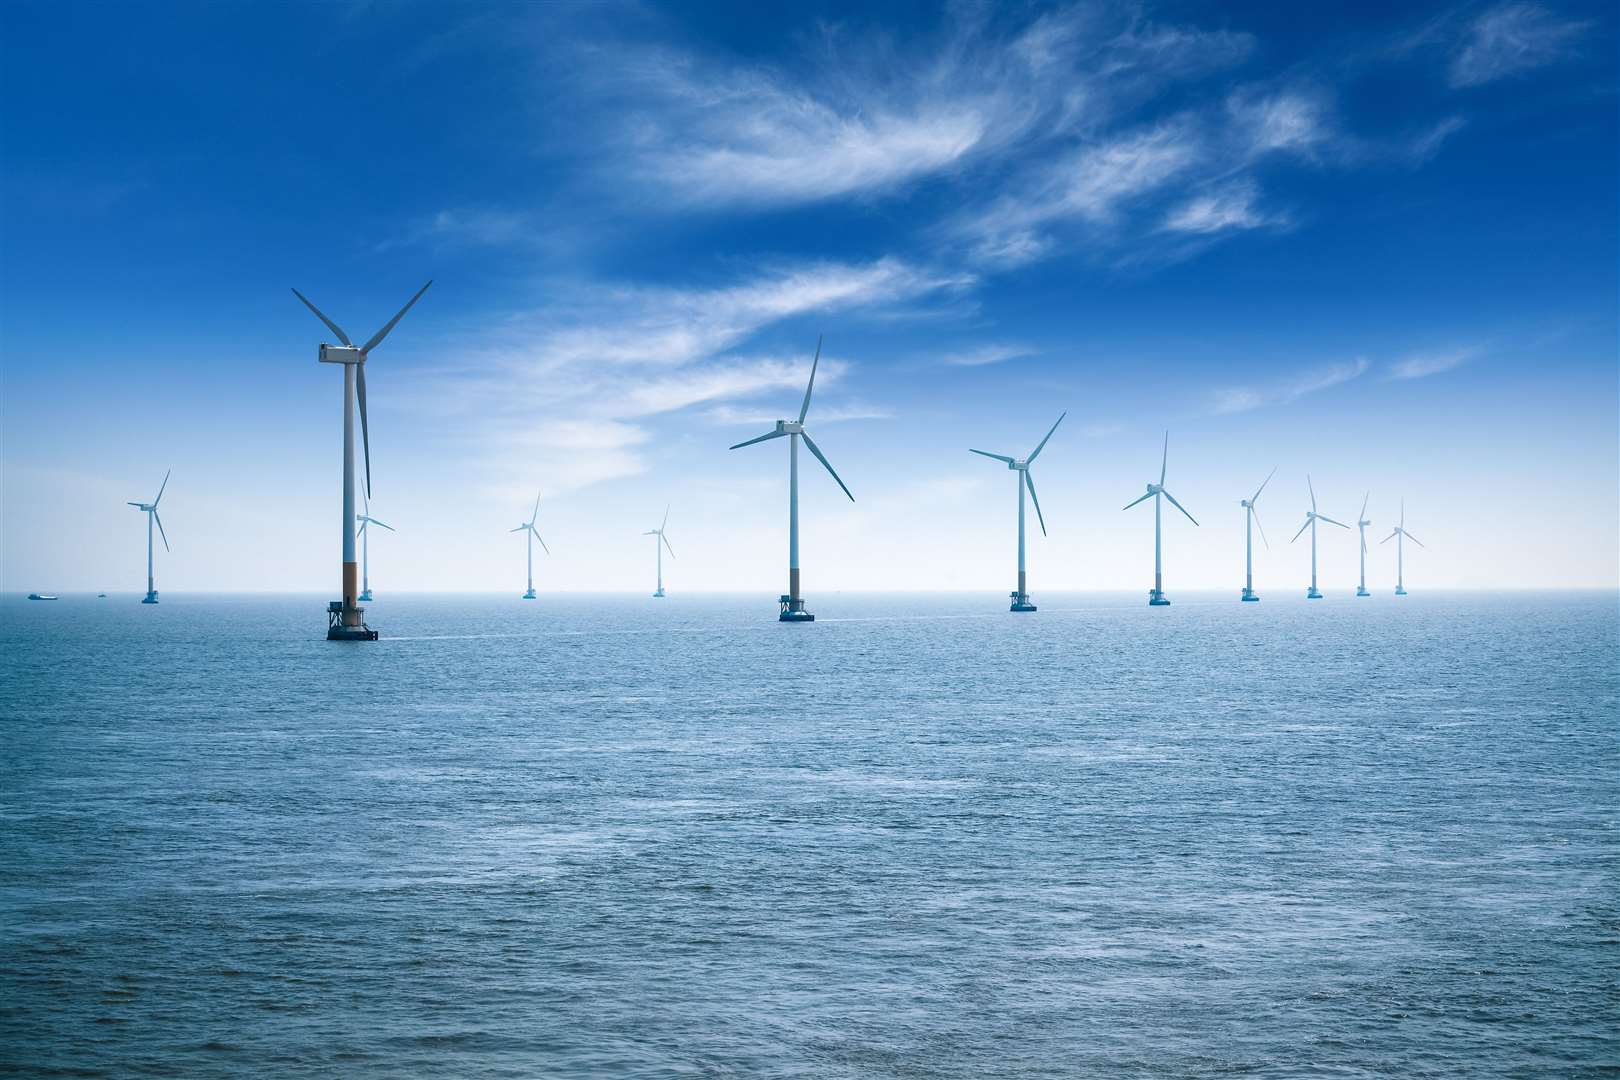 The first option agreements for the latest round of offshore wind farm developments are expected to be awarded in January of next year.